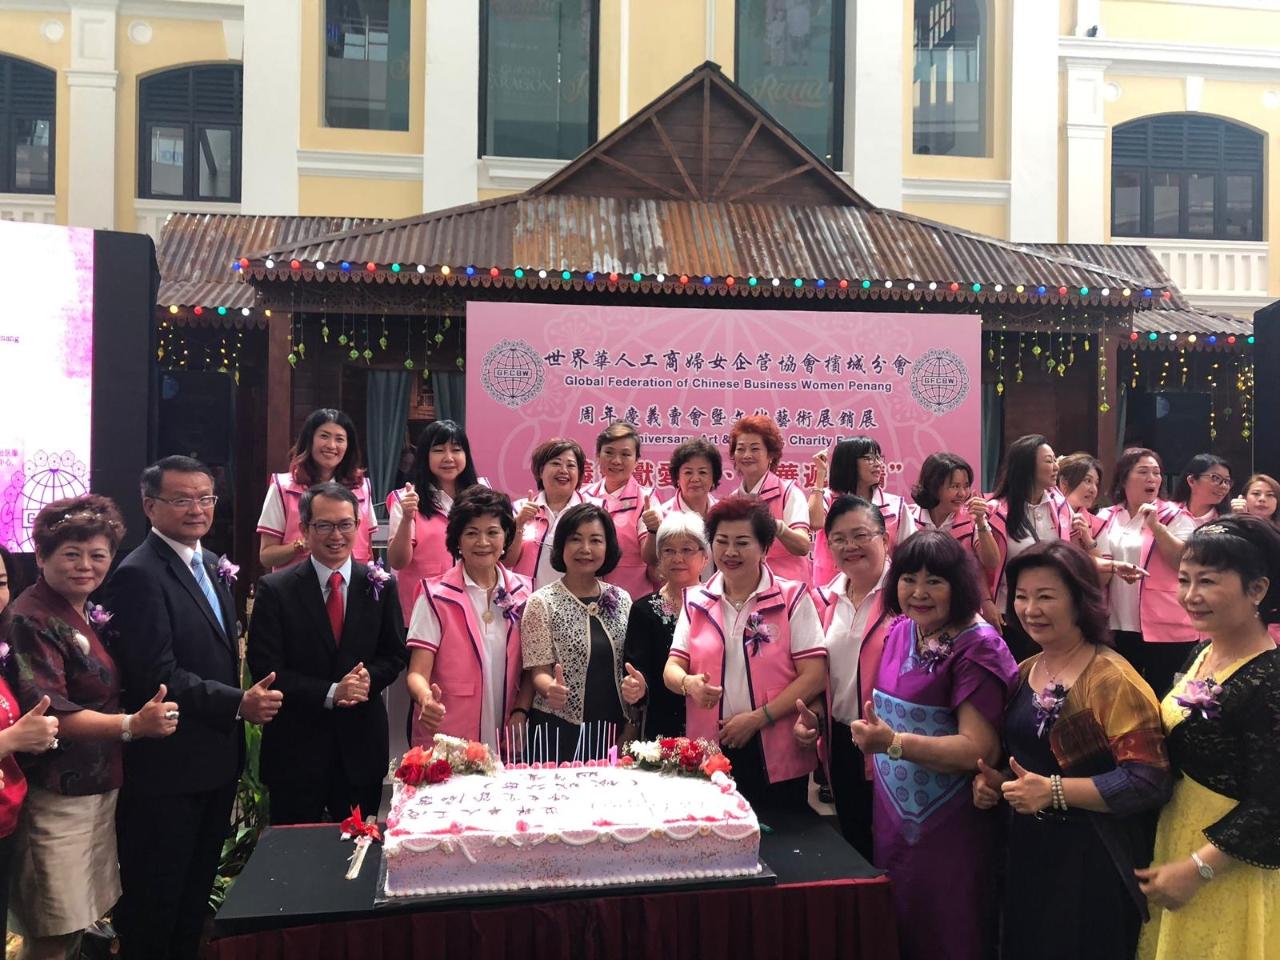 Representative Anne Hung (first row, fifth from left) celebrates the first anniversary of the Global Federation of Chinese Business Women (Penang).